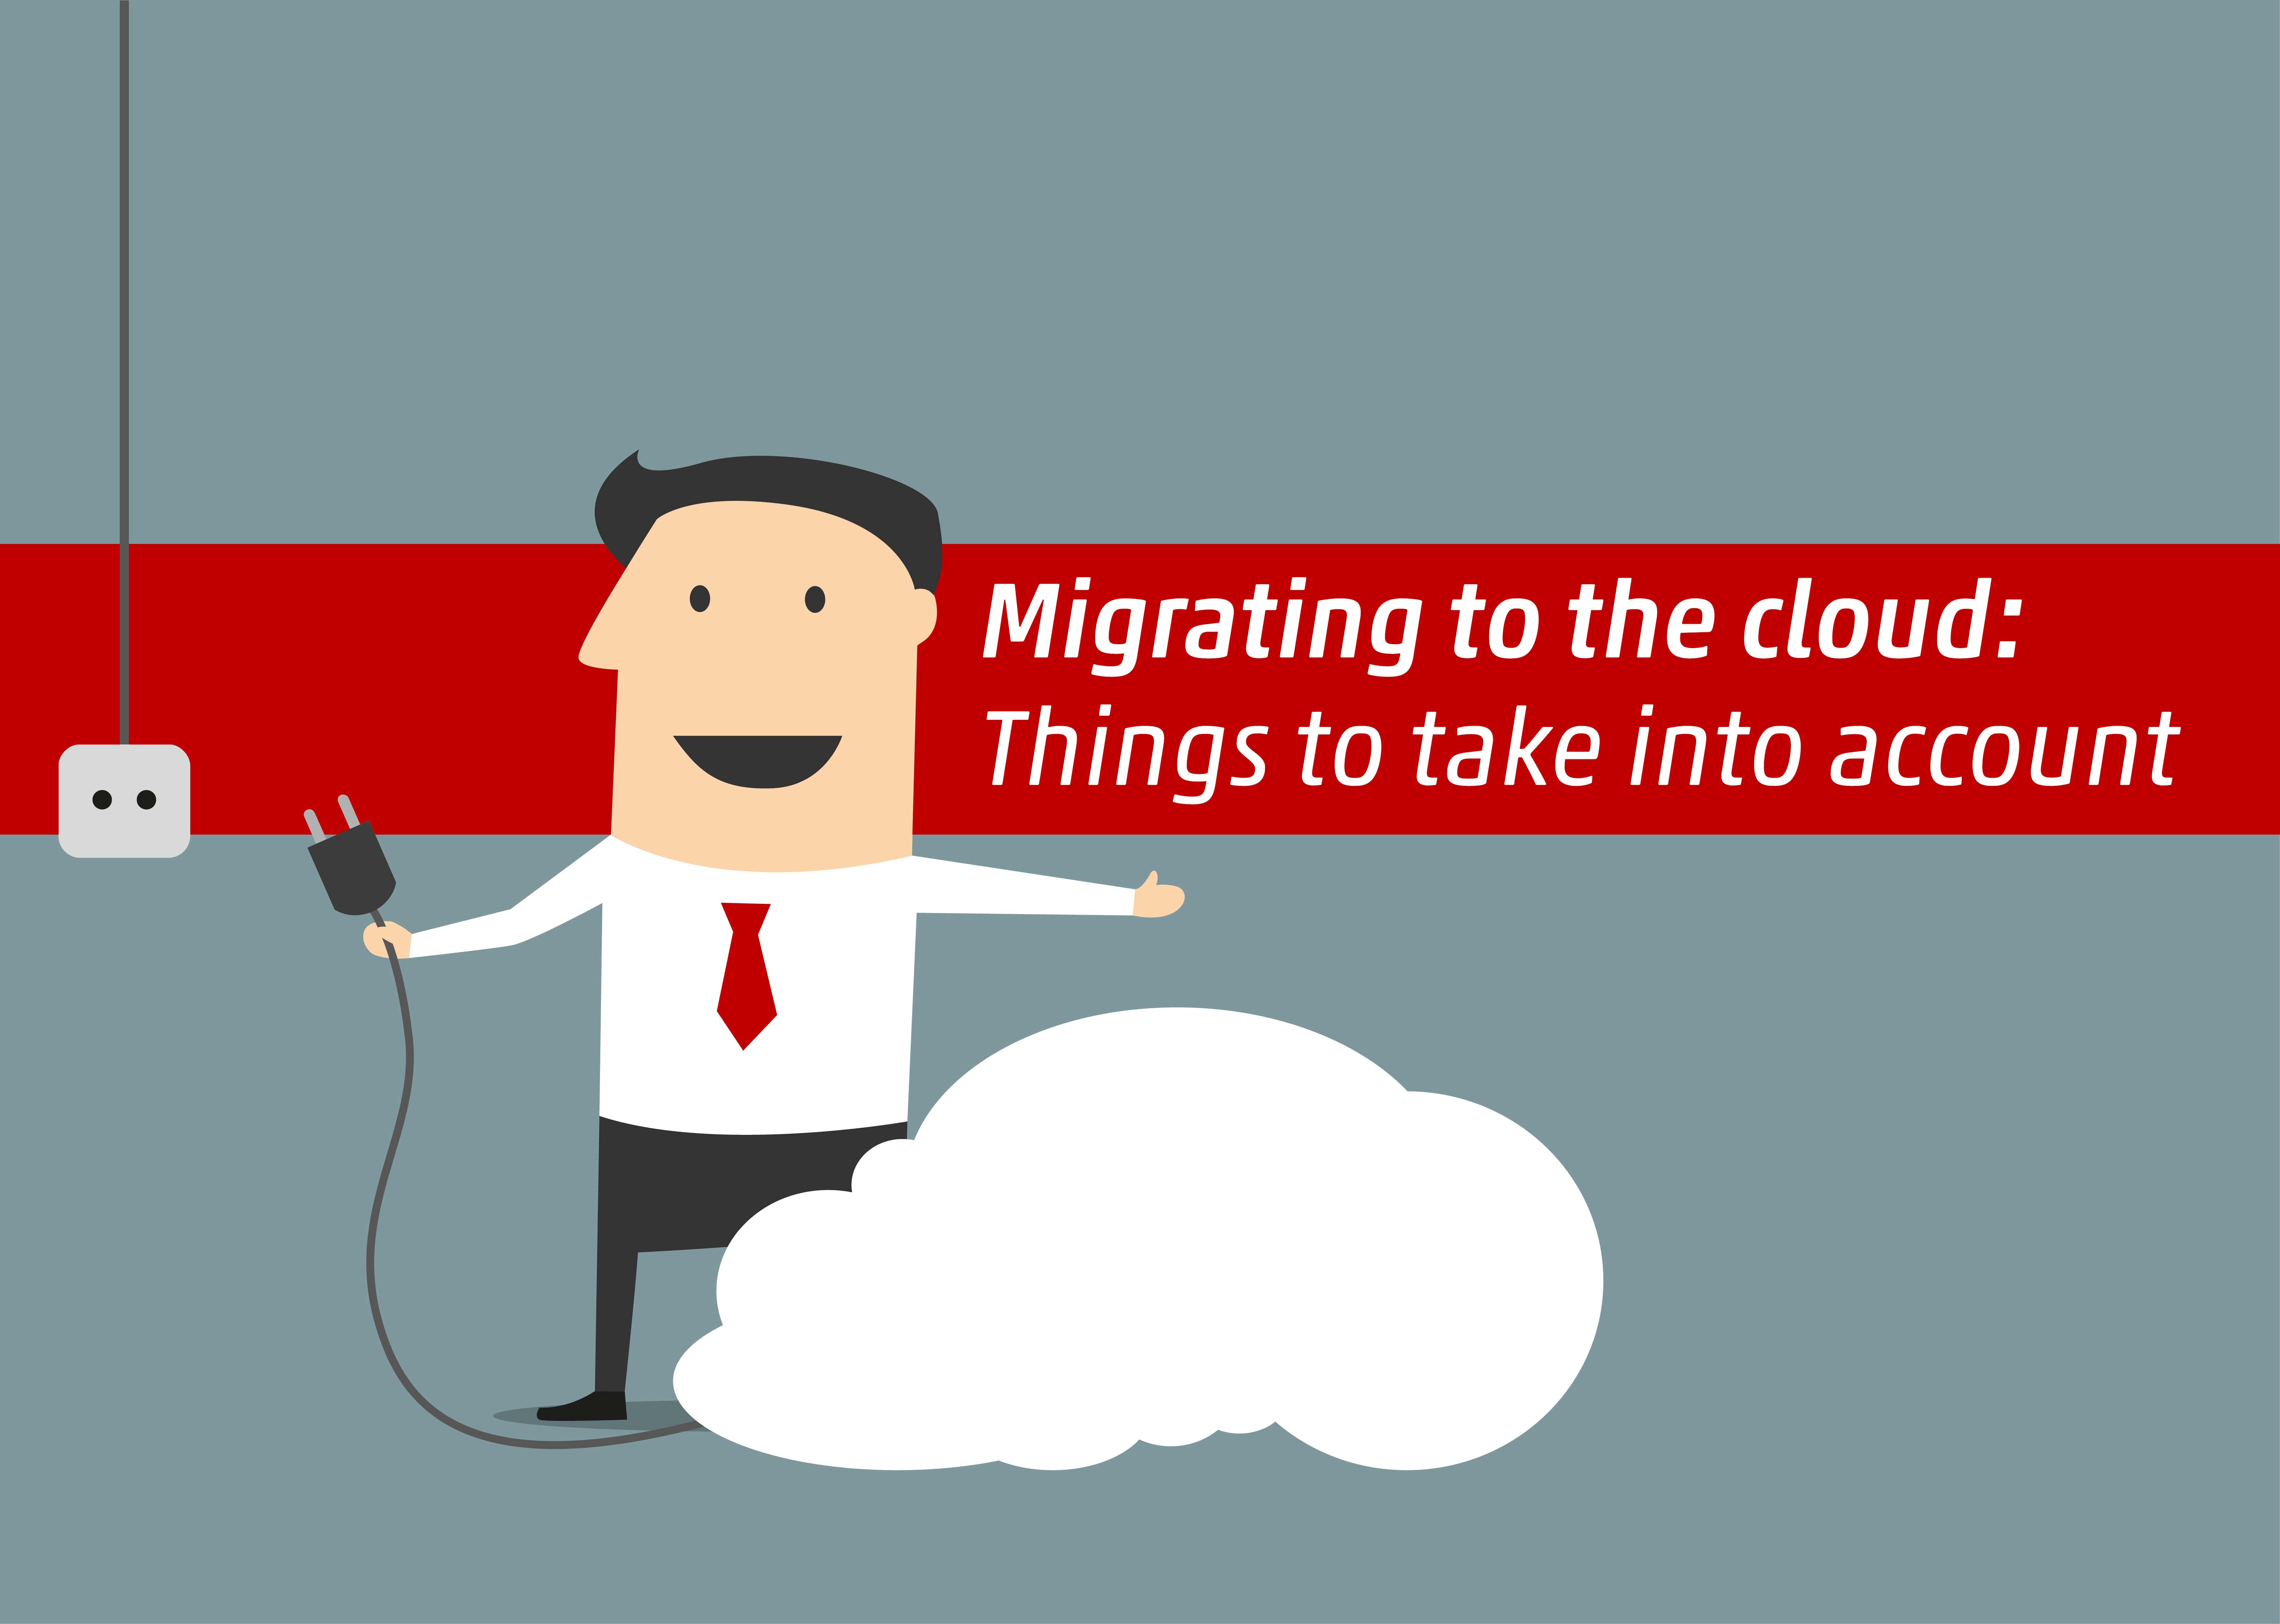 Migrating to cloud